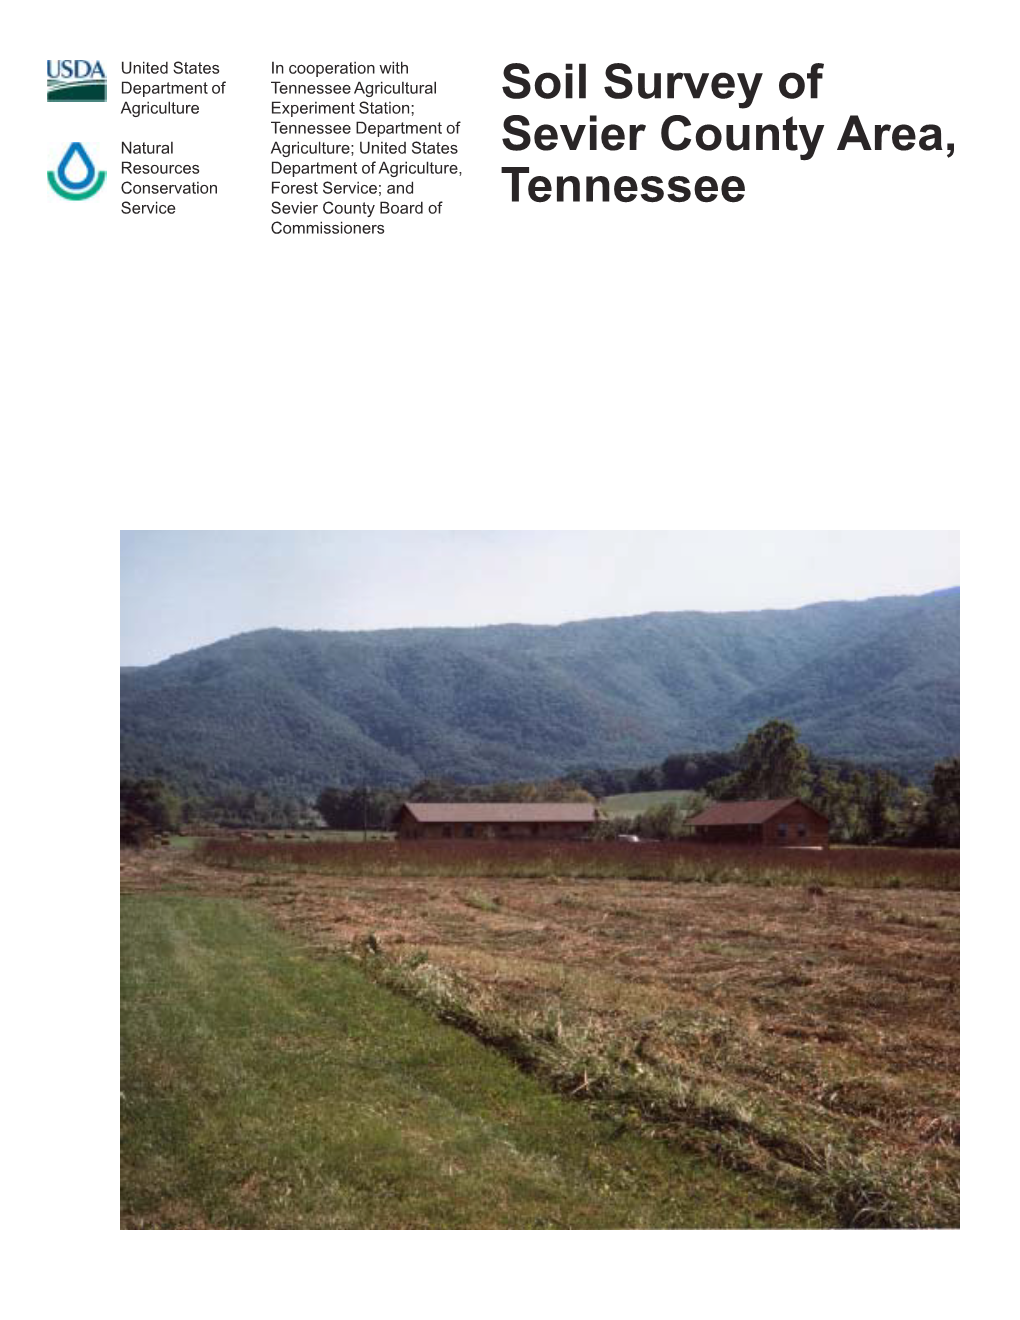 Soil Survey of Sevier County Area, Tennessee